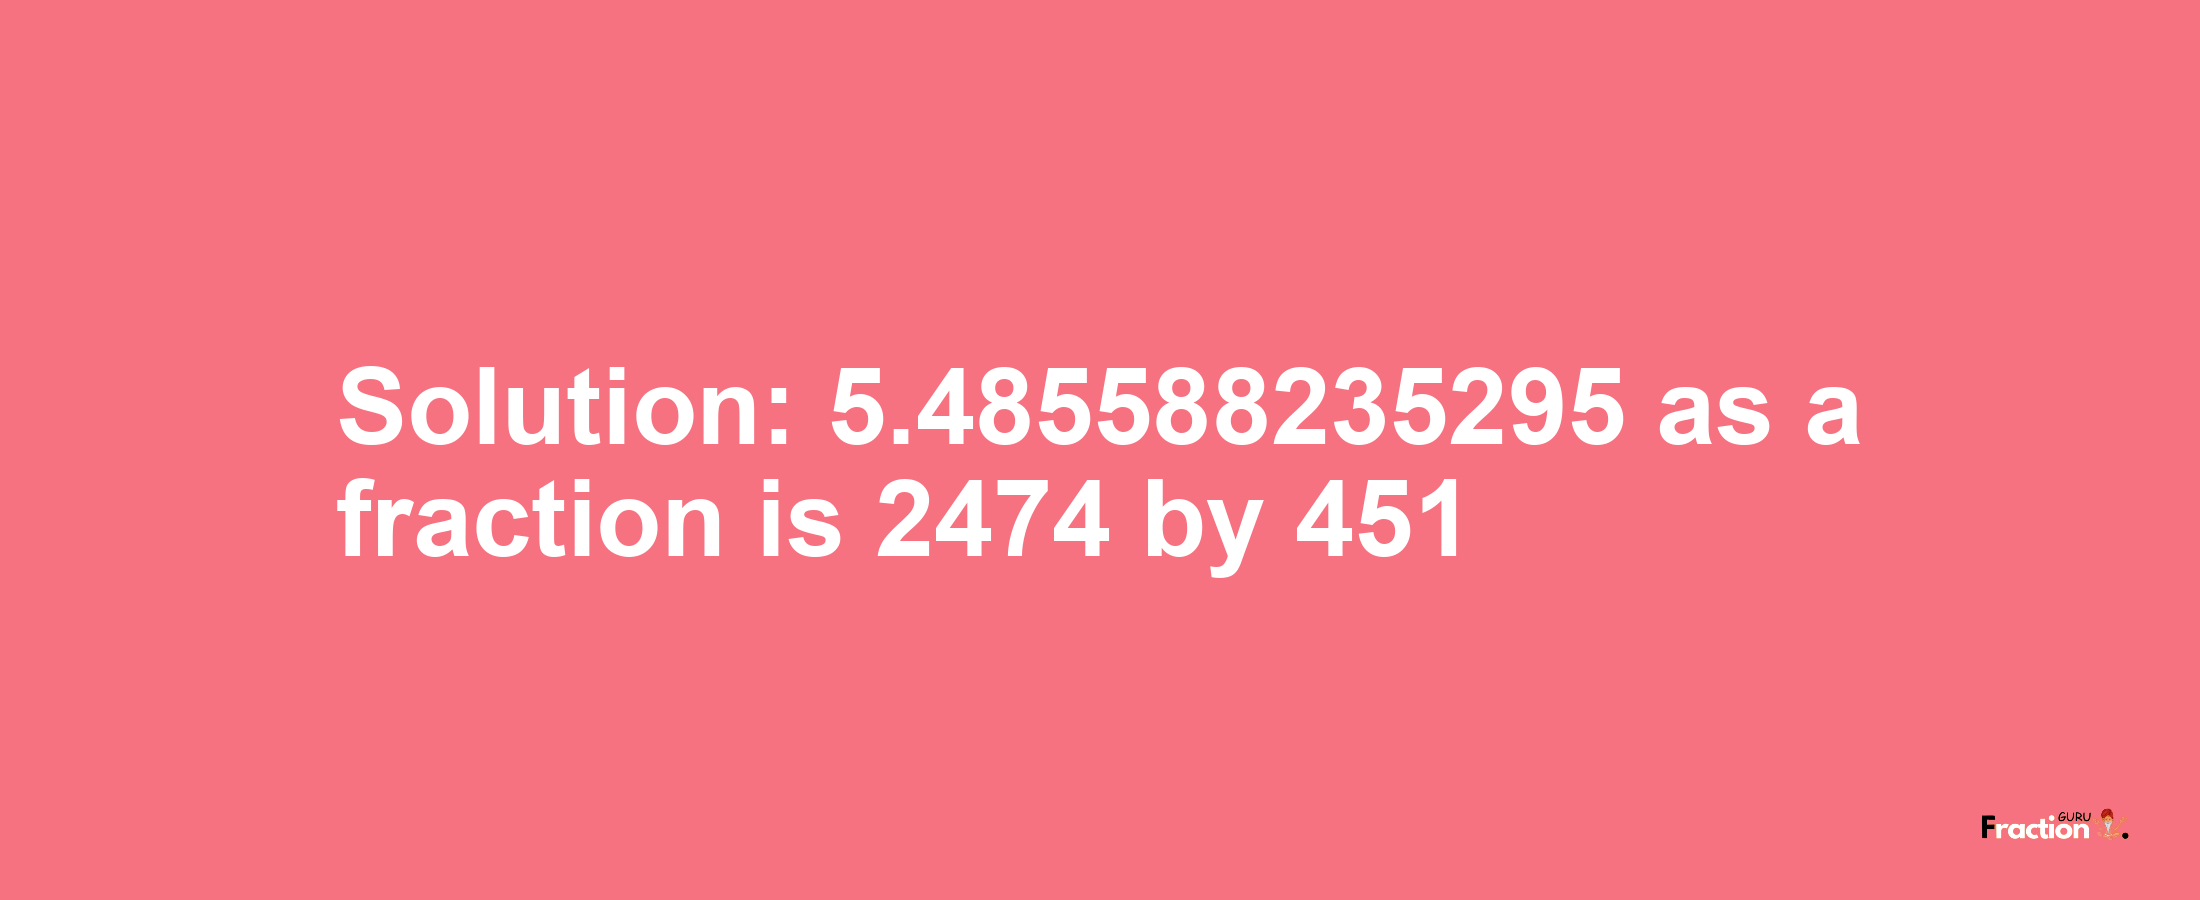 Solution:5.485588235295 as a fraction is 2474/451